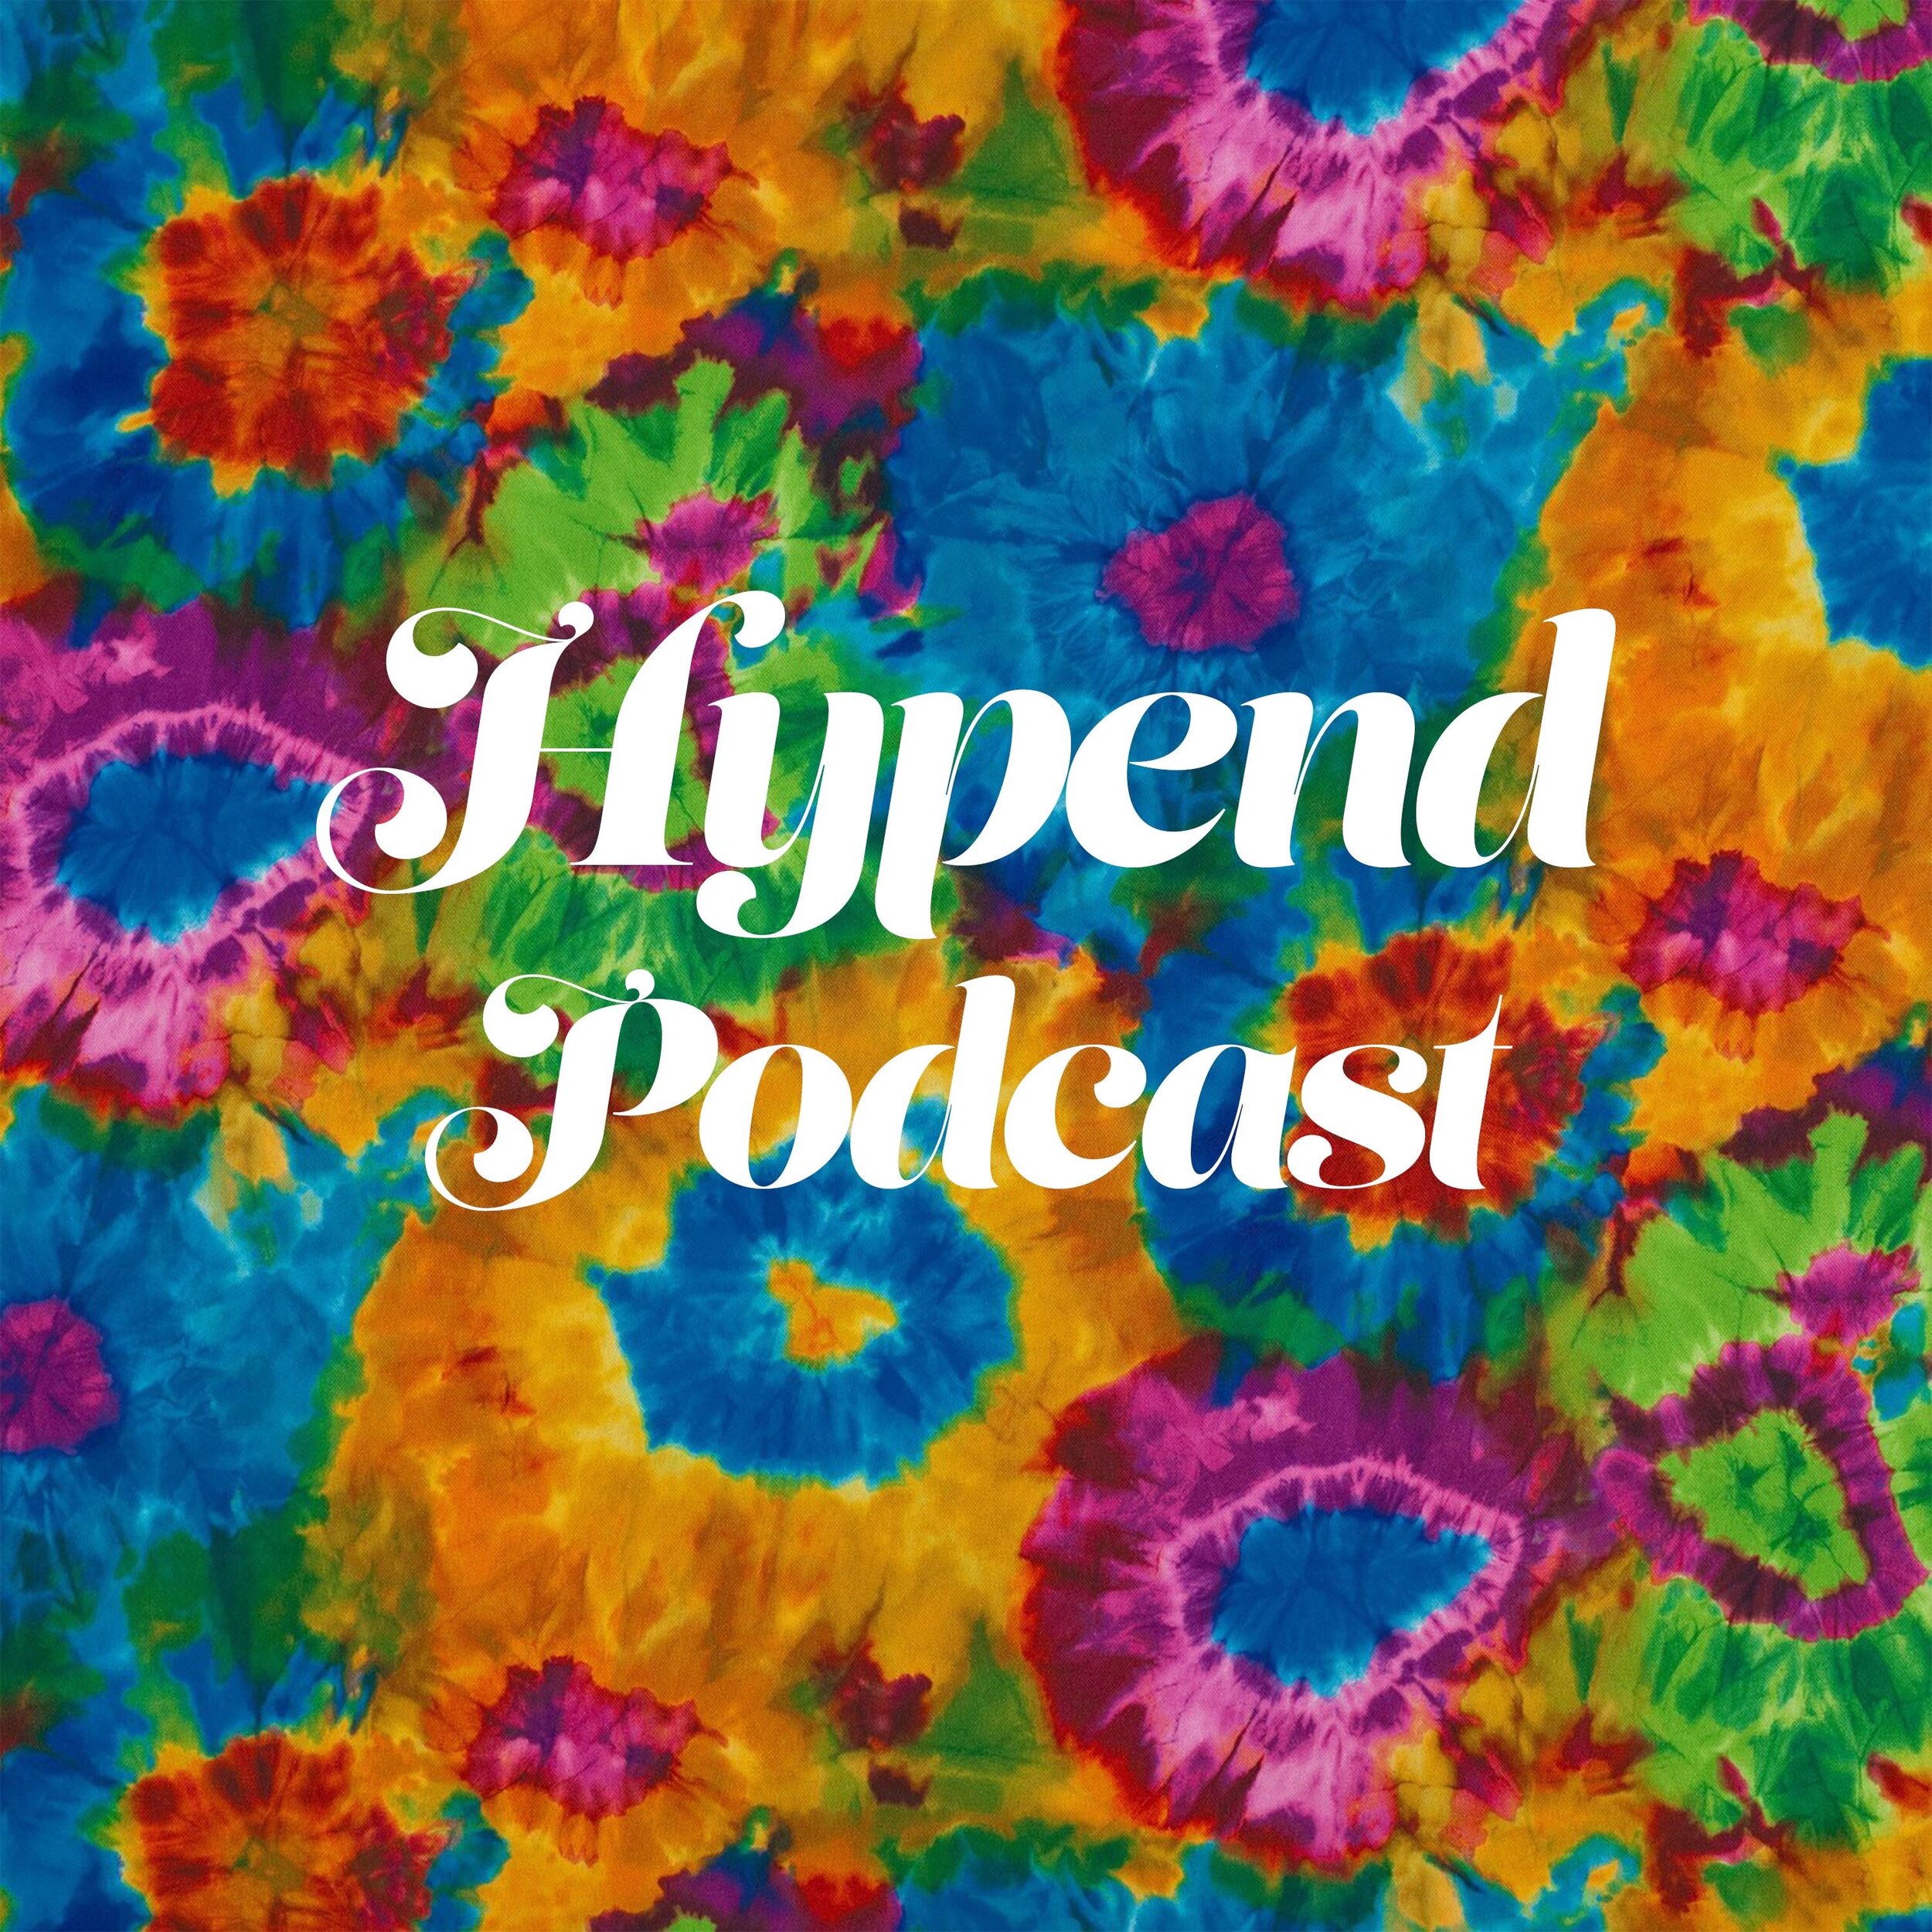 HYPEND Podcast EP. 1 | Boys Only “Keissi”